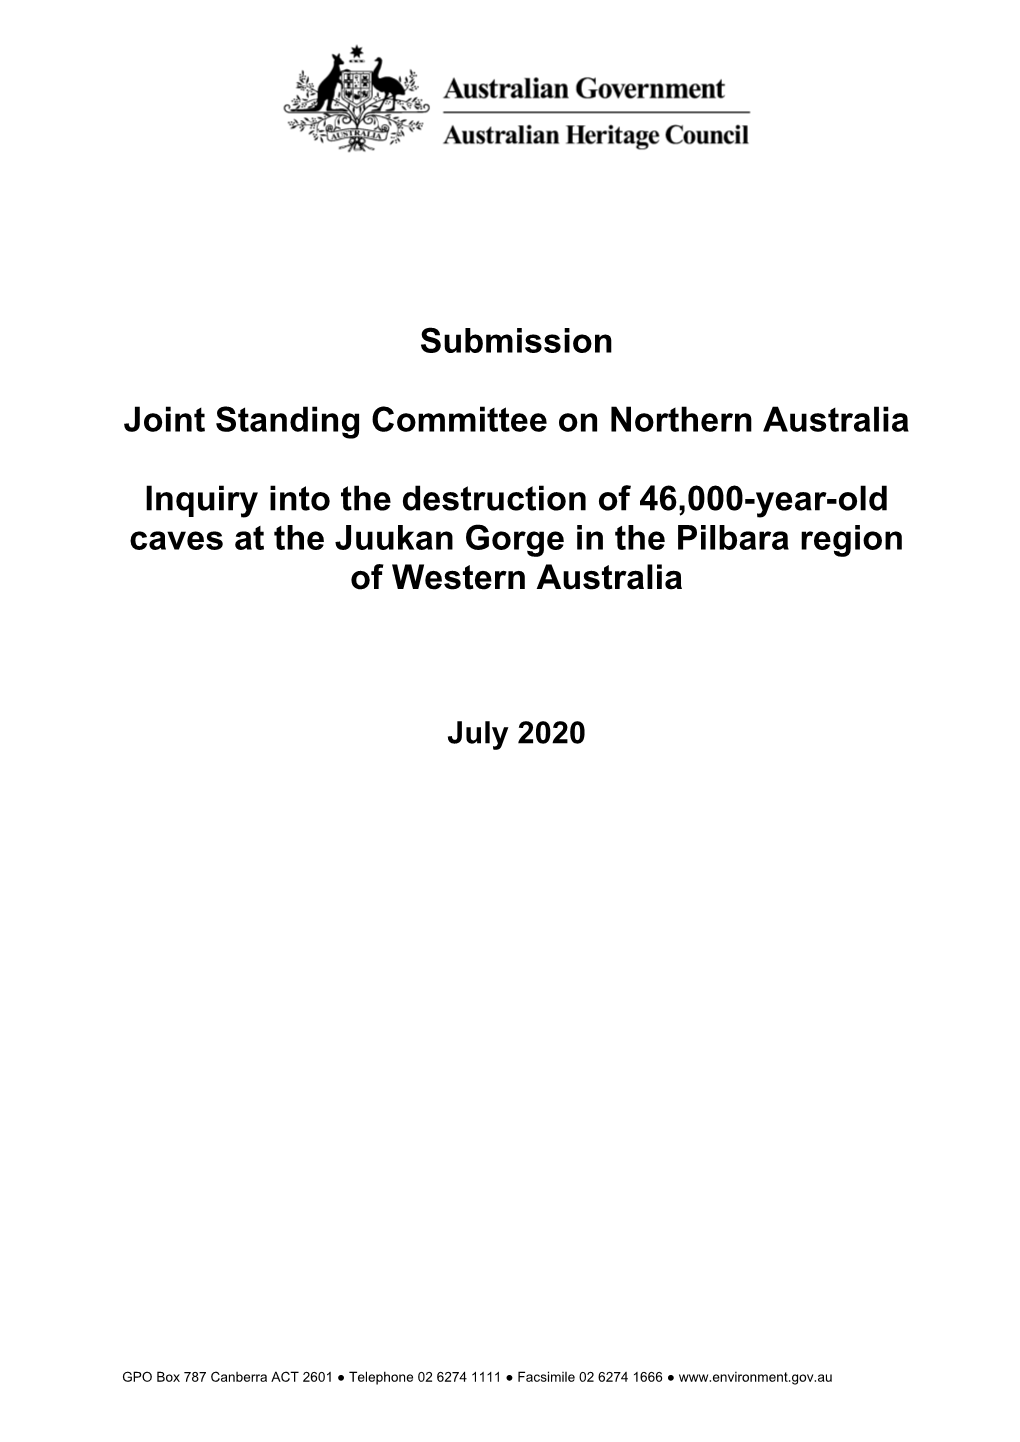 AHC Submission.Juukan Gorge.July 2020 FINAL